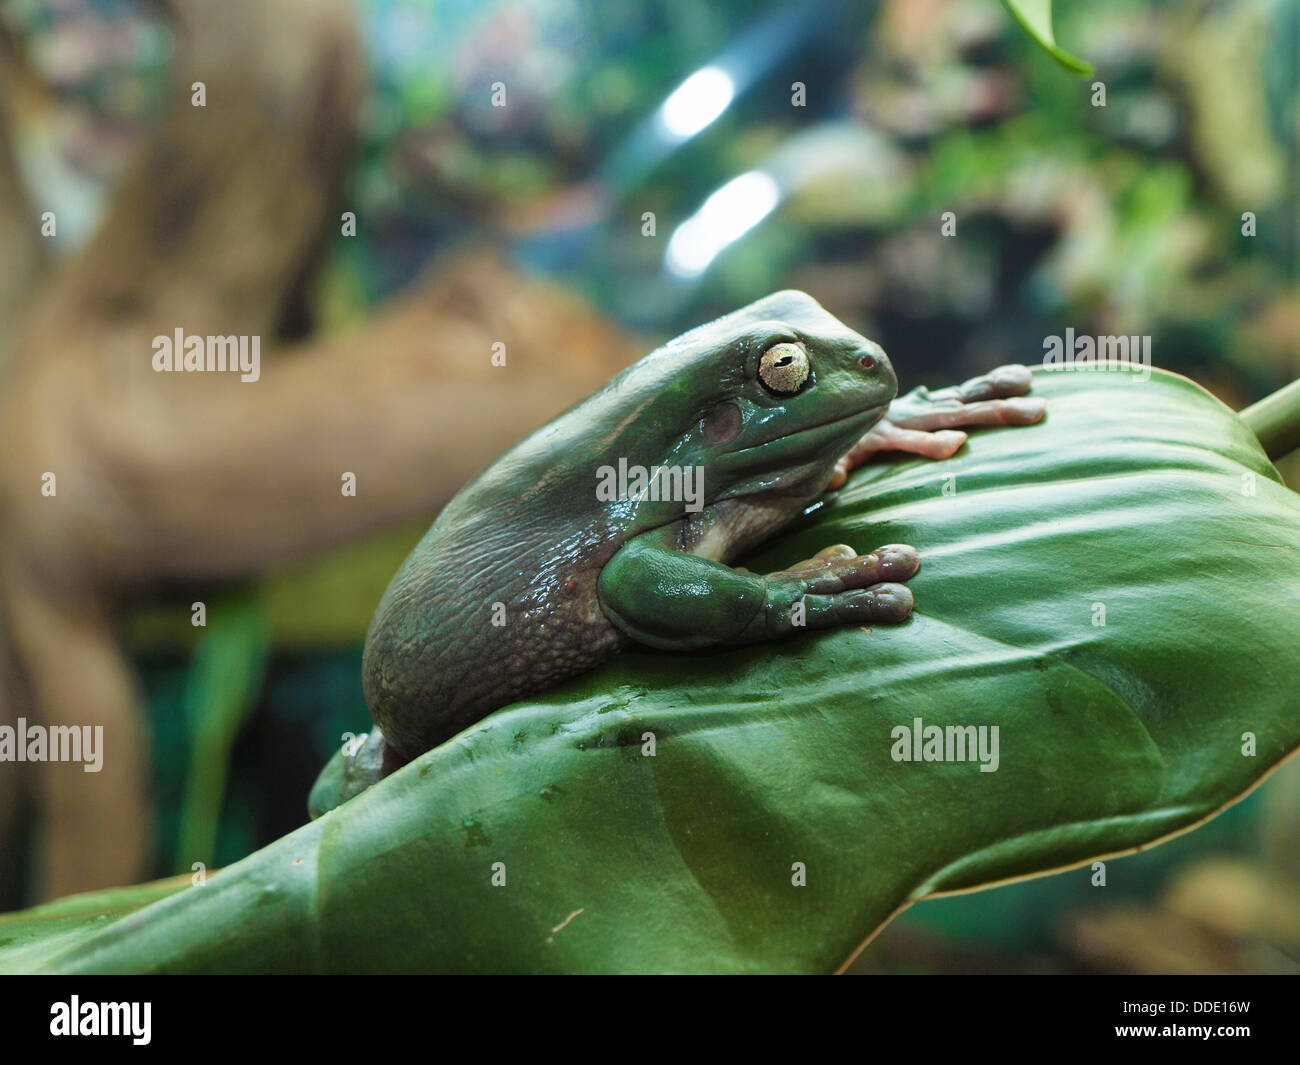 White's Dumpy Tree Frog on a branch Stock Photo